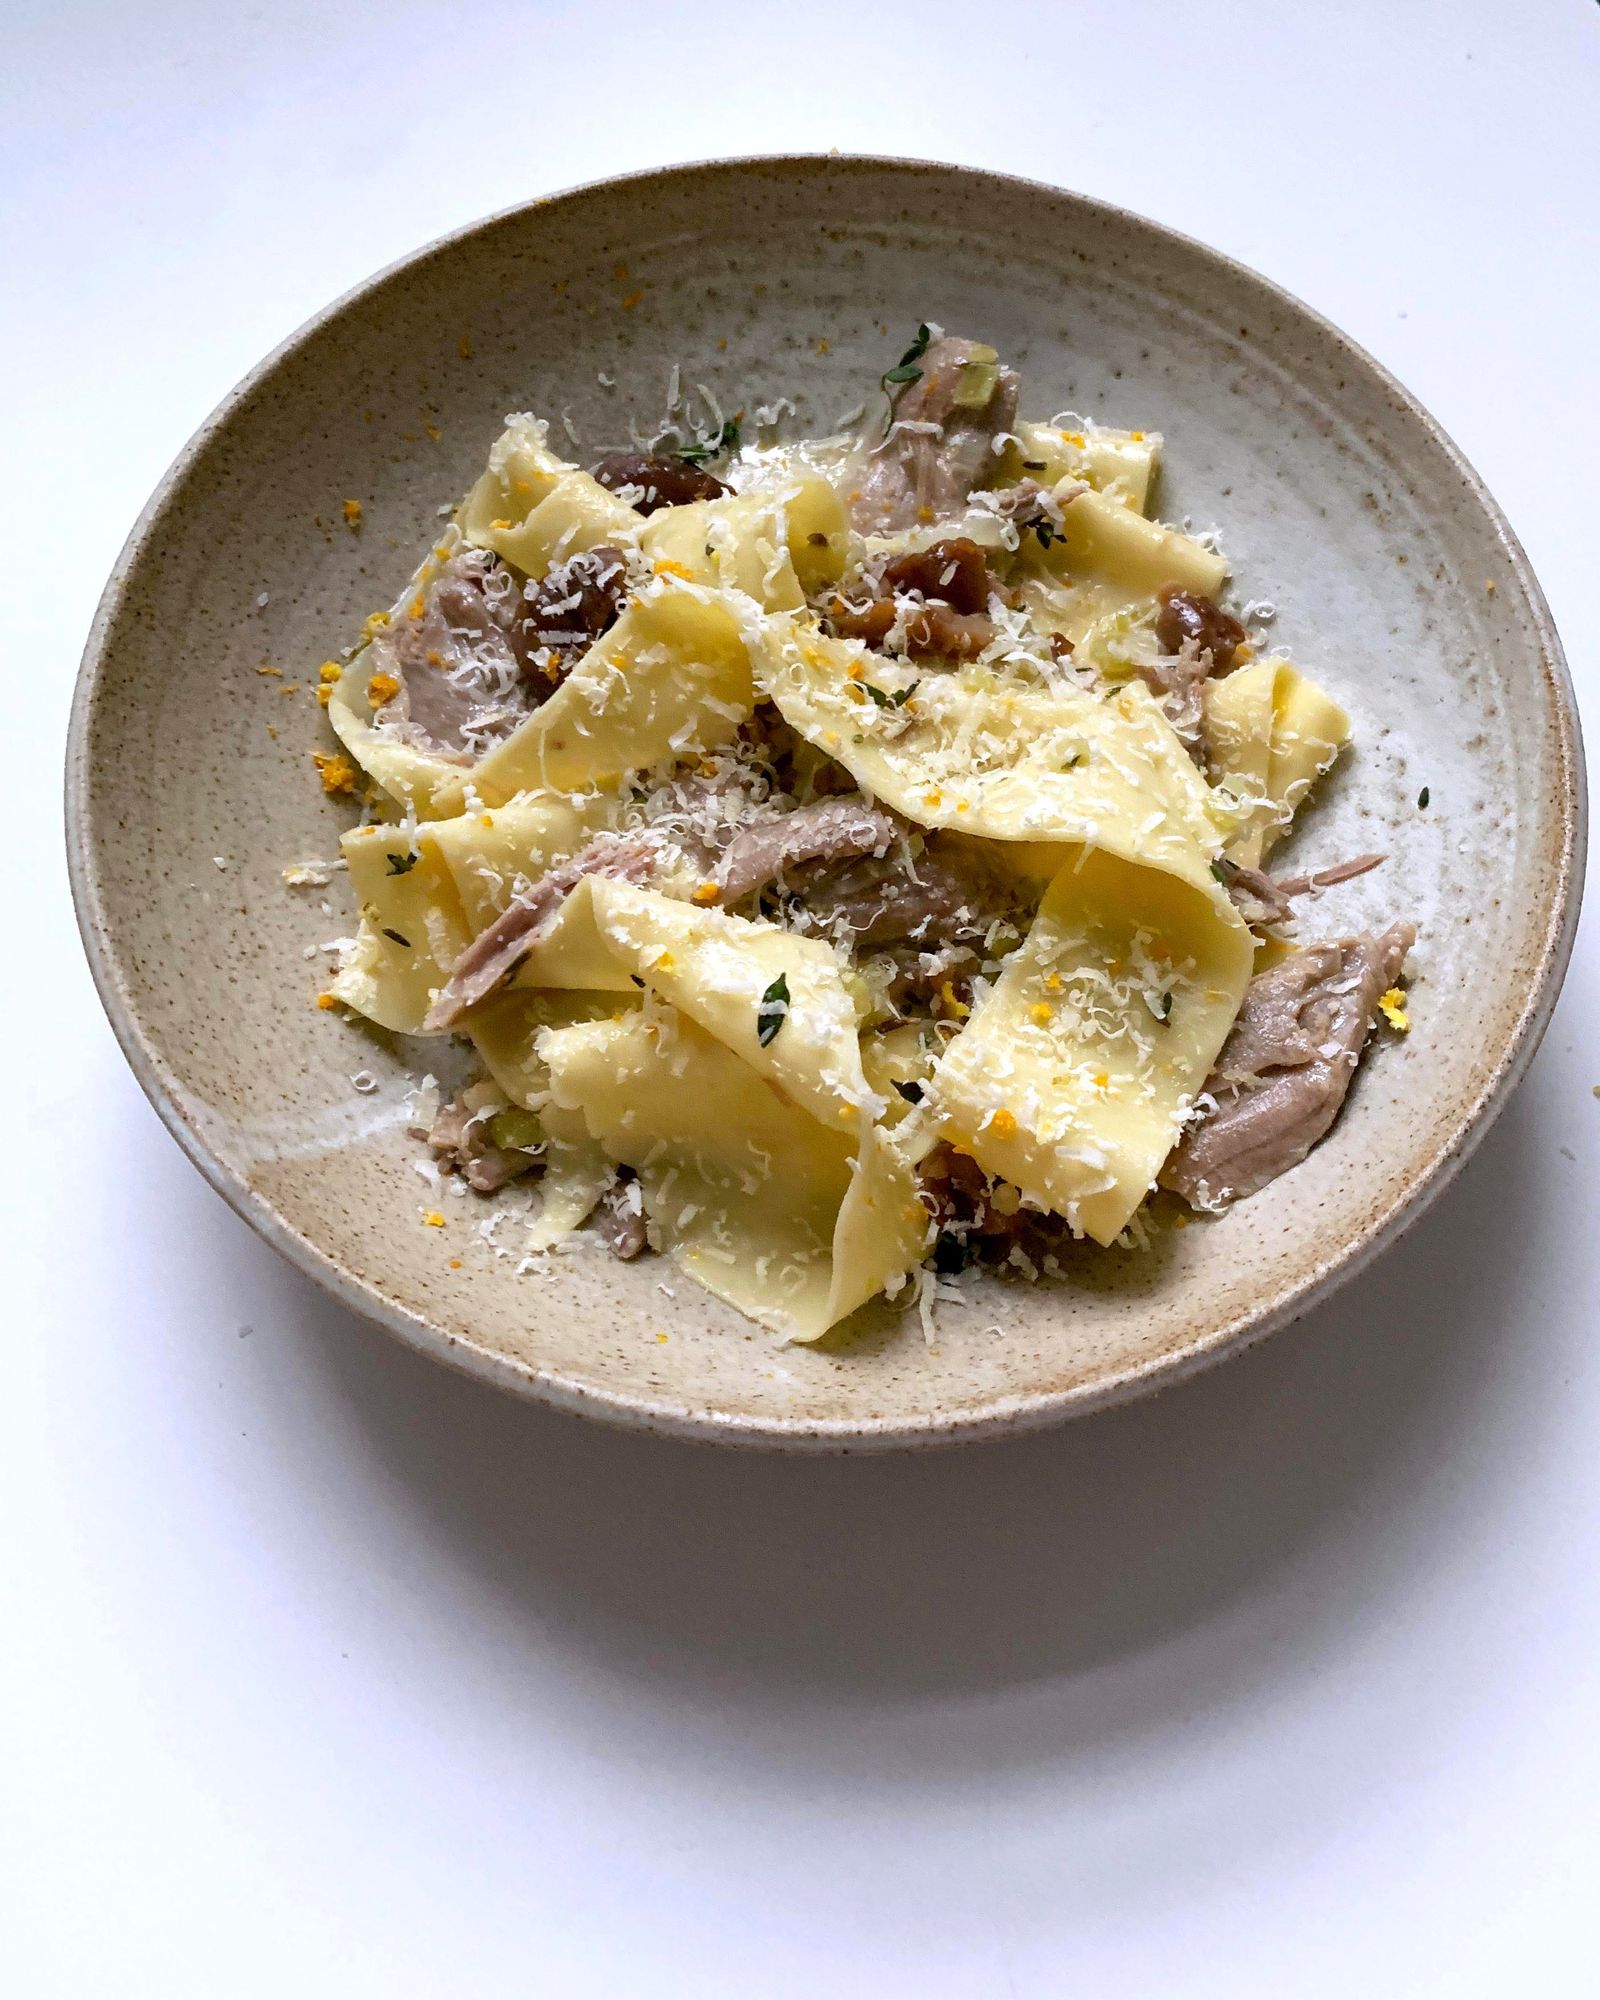 Pappardelle with Turkey and Chestnut Ragu